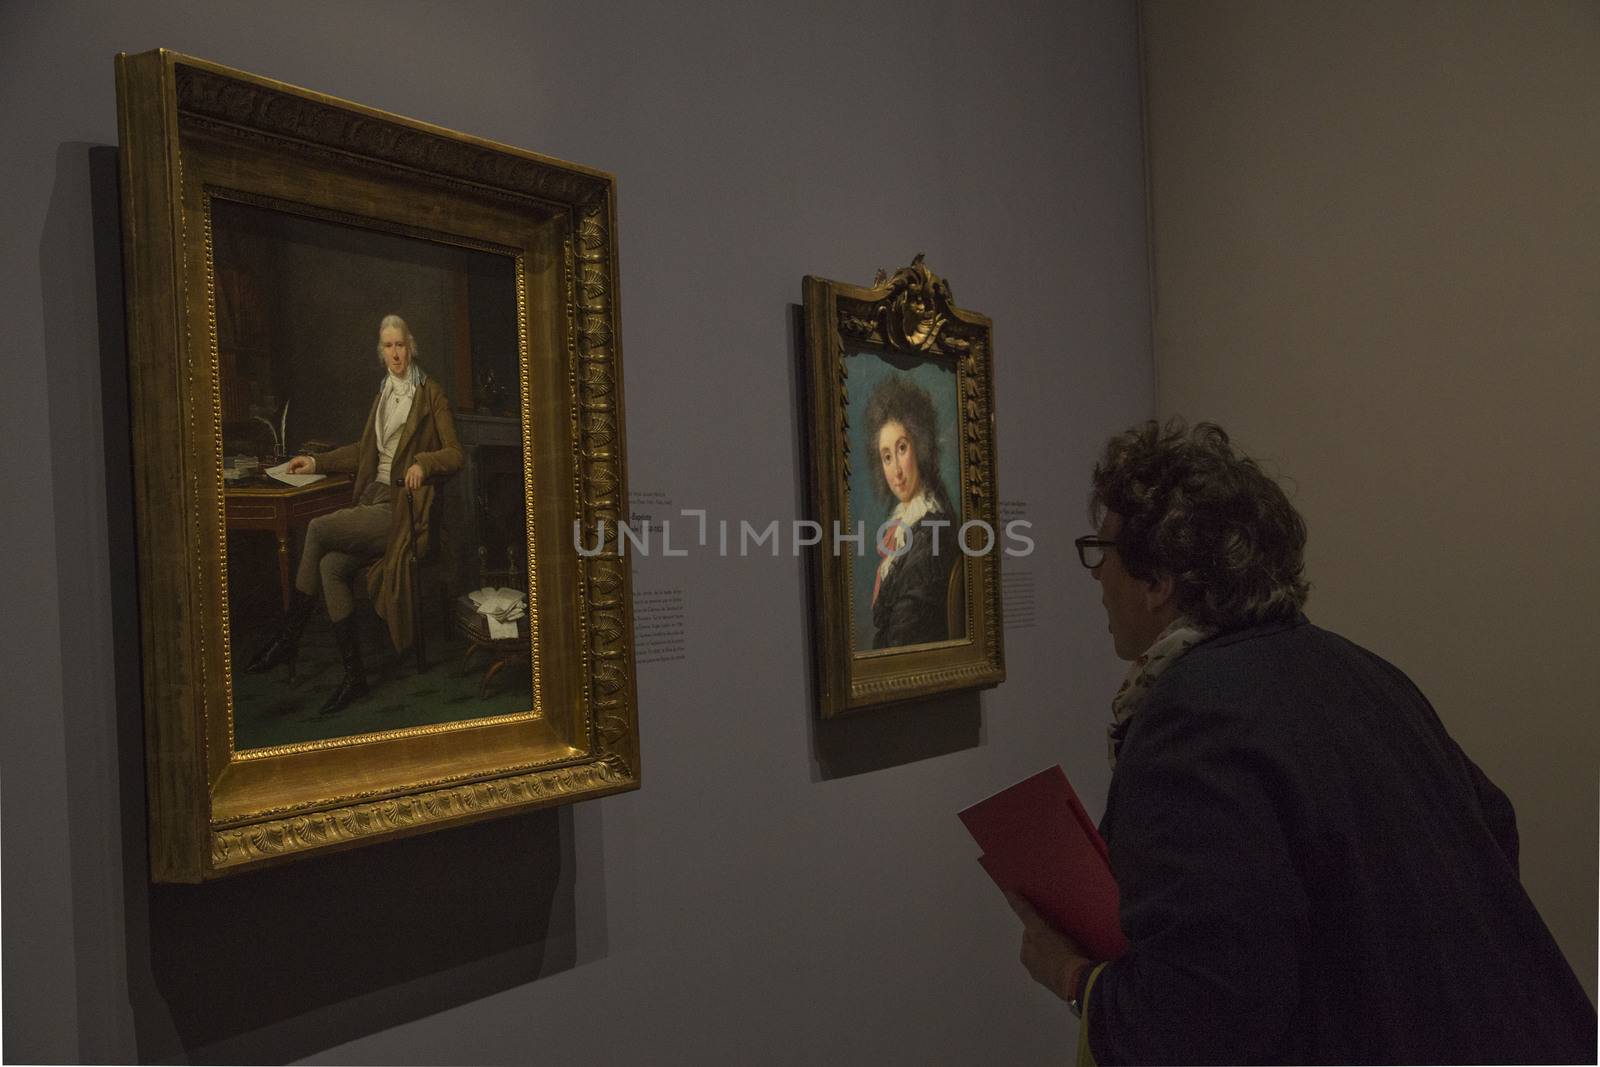 FRANCE, Paris: A man watches two paintings of �lisabeth Louise Vig�e Le Brun in Le Grand Palais, in Paris on September 21, 2015. �lisabeth Louise Vig�e Le Brun (1755-1842) is one of the greater portrait painter of her time. She was chosen to paint the very famous queen of France Marie-Antoinette. 